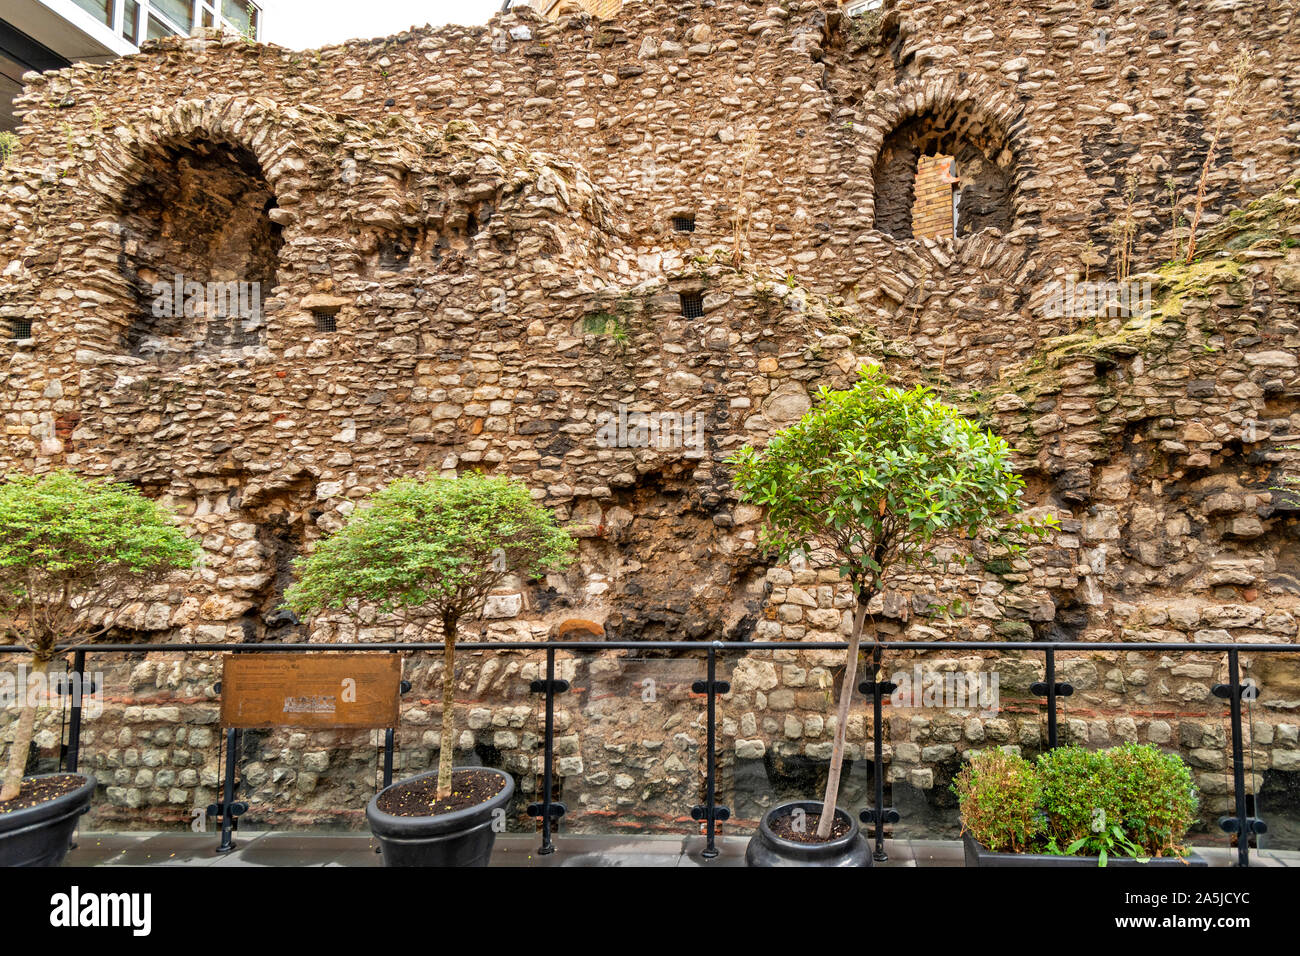 LONDON THE LONDON WALL WALK AT COOPERS ROW THE REMAINS OF THE OLD CITY WALL  Stock Photo - Alamy